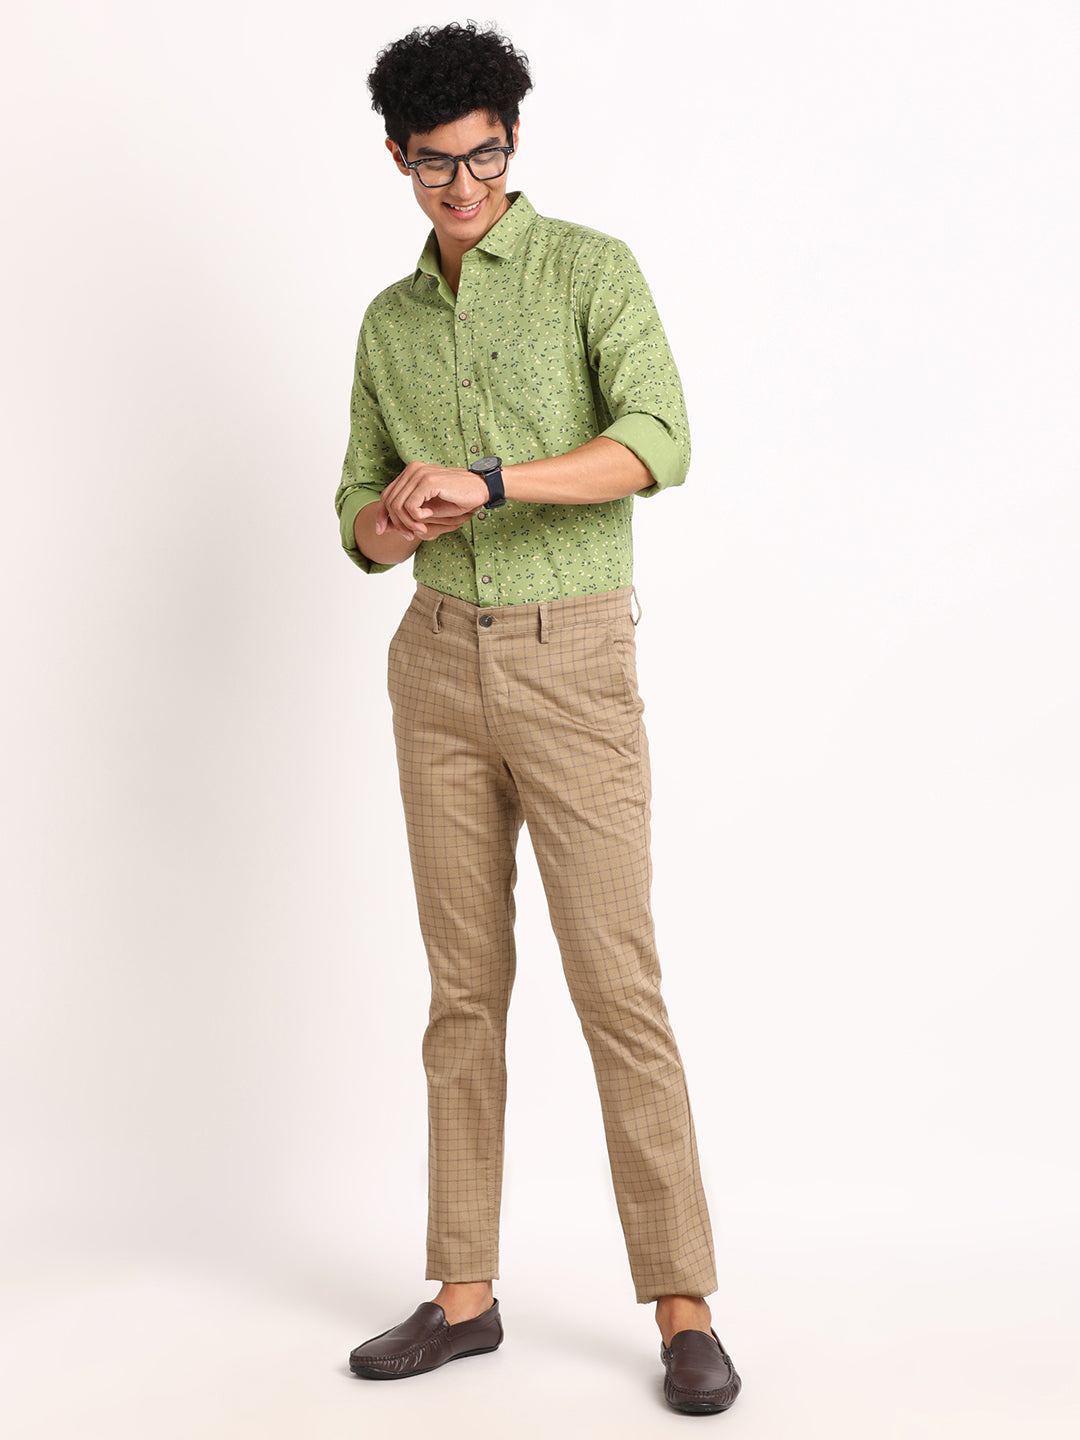 Cotton Stretch Khaki Checkered Narrow Fit Flat Front Casual Trouser